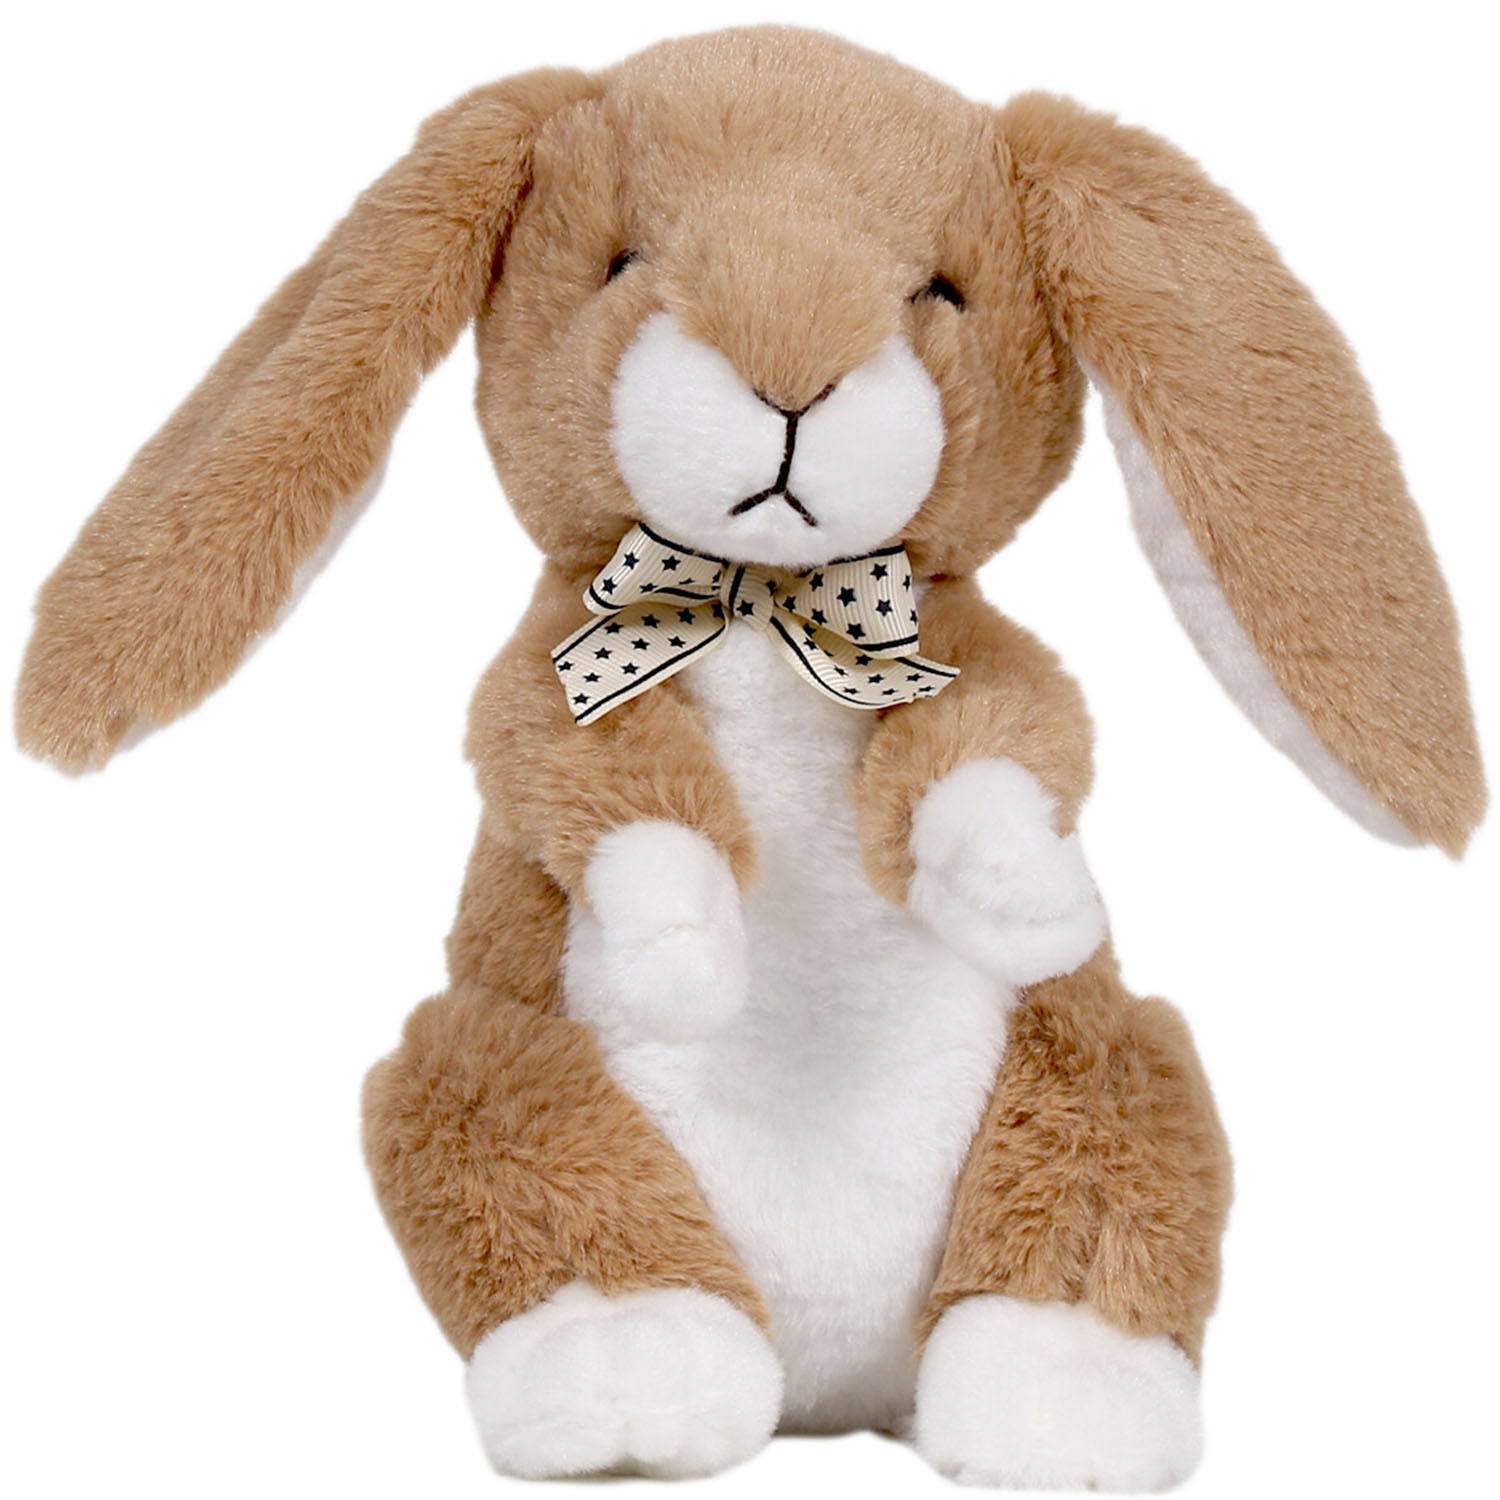 Easter Bunny Plush Toy Image